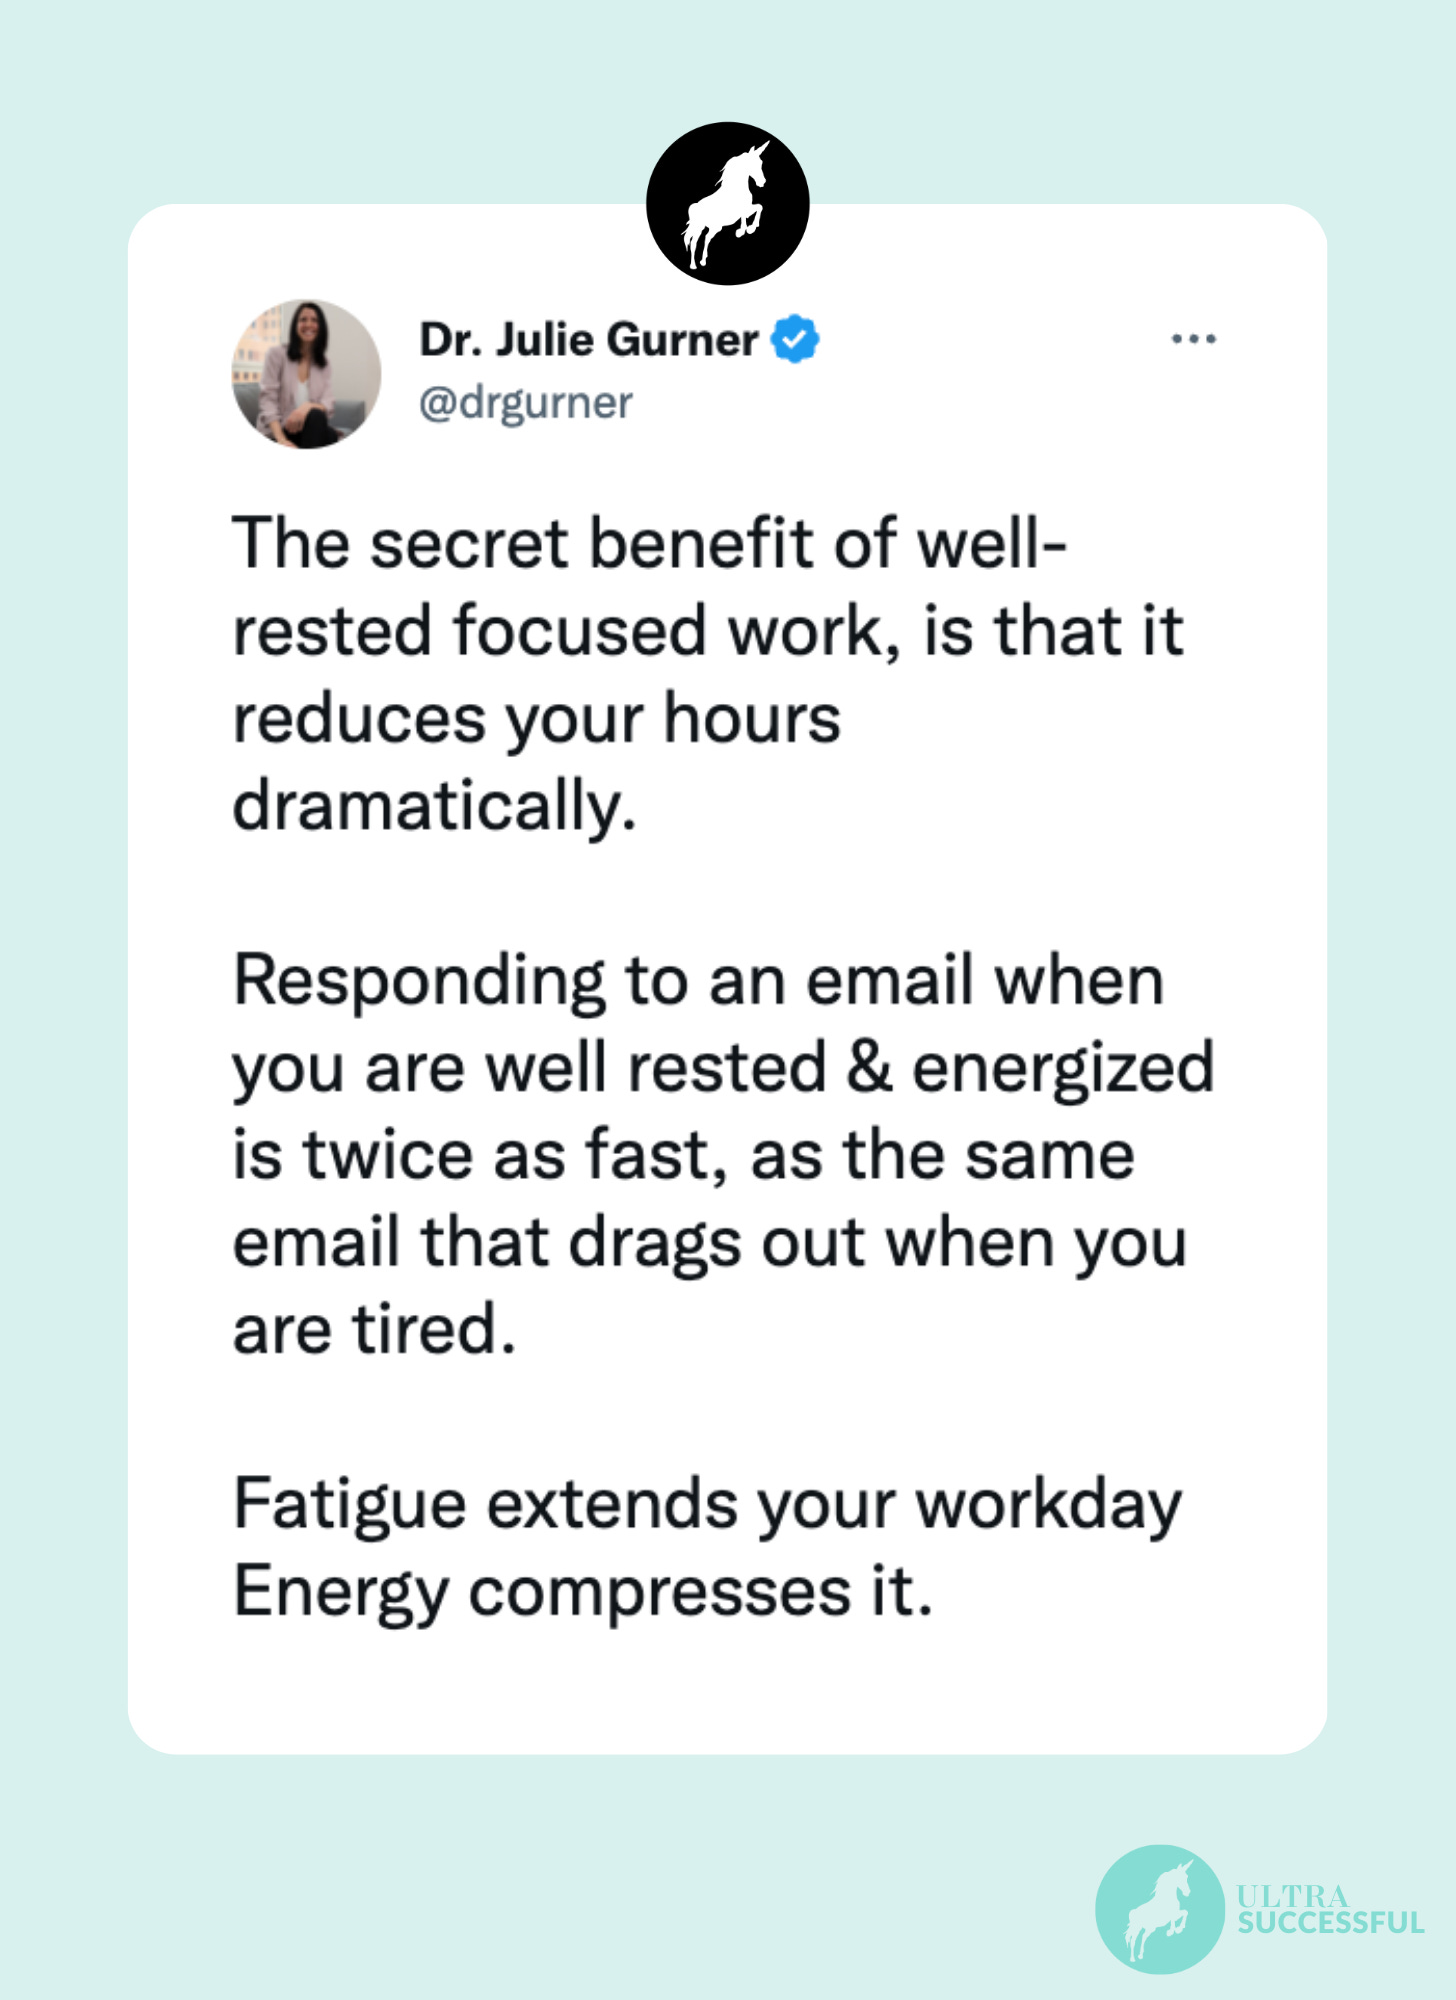 @drgurner: The secret benefit of well-rested focused work, is that it reduces your hours dramatically.  Responding to an email when you are well rested & energized is twice as fast, as the same email that drags out when you are tired.   Fatigue extends your workday Energy compresses it.